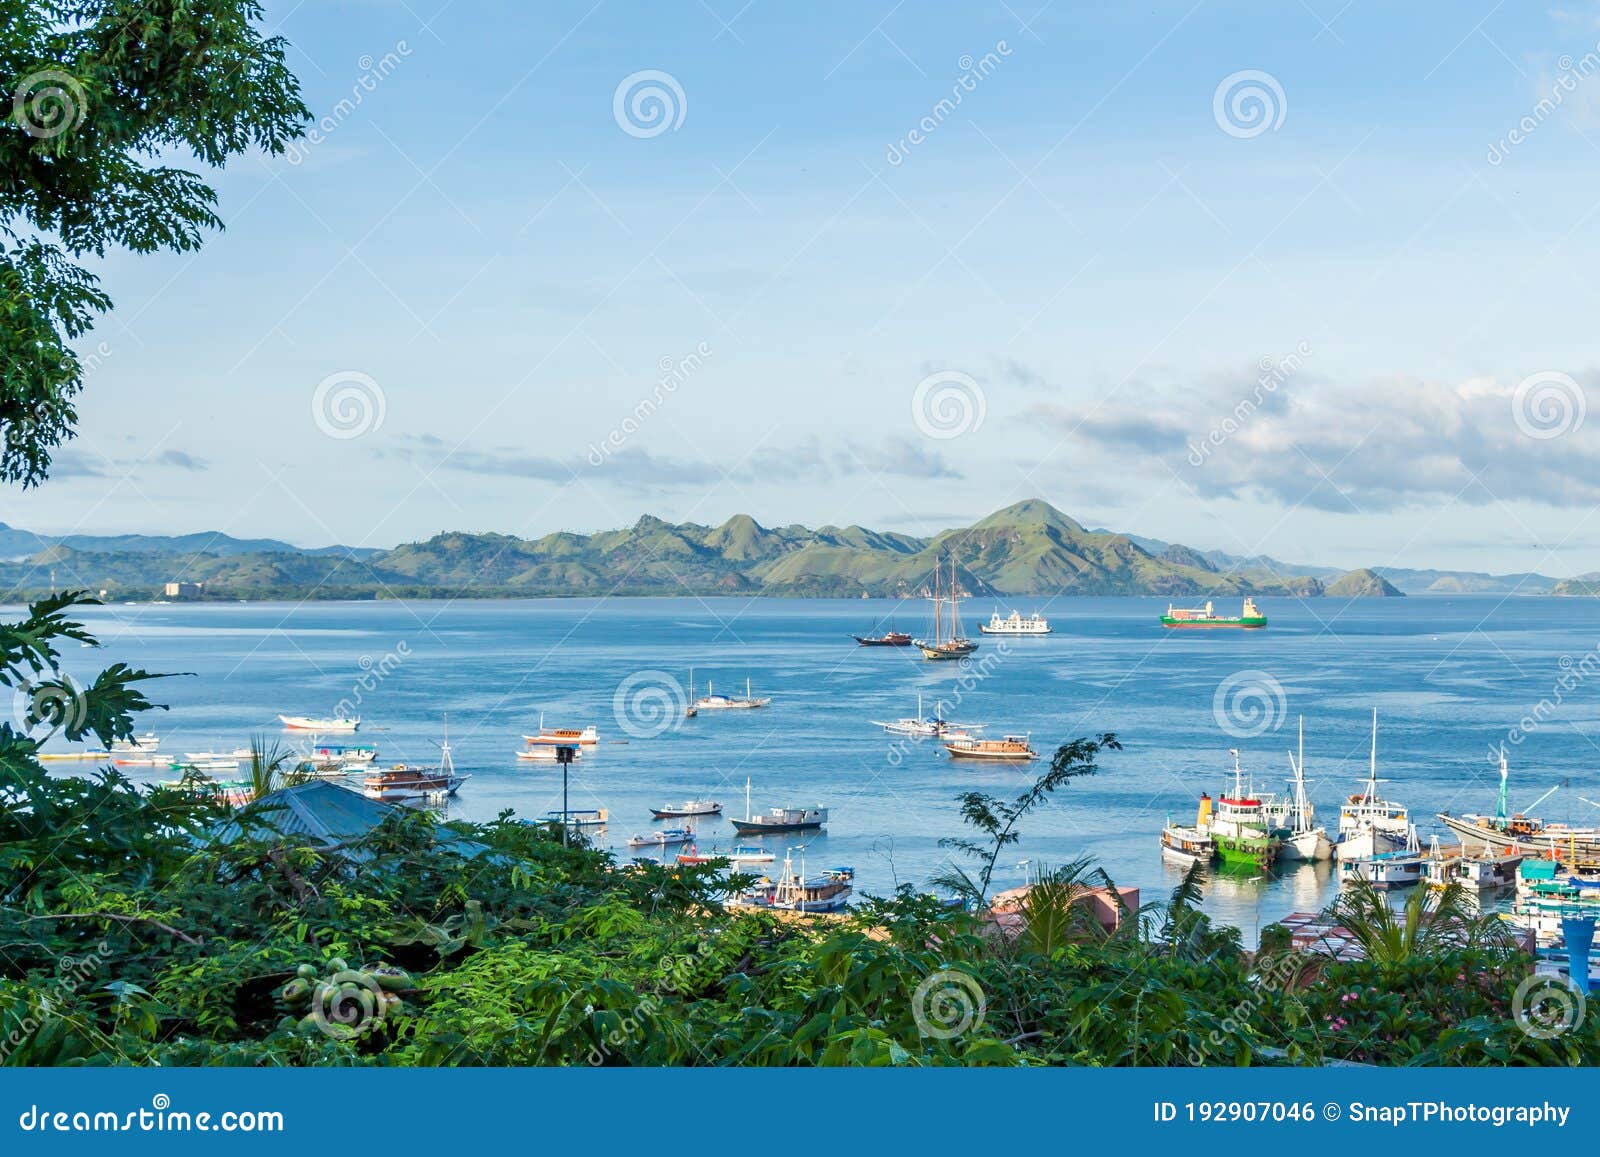 a view over labuan bajo harbour and palua karawo in early morning, indonesia